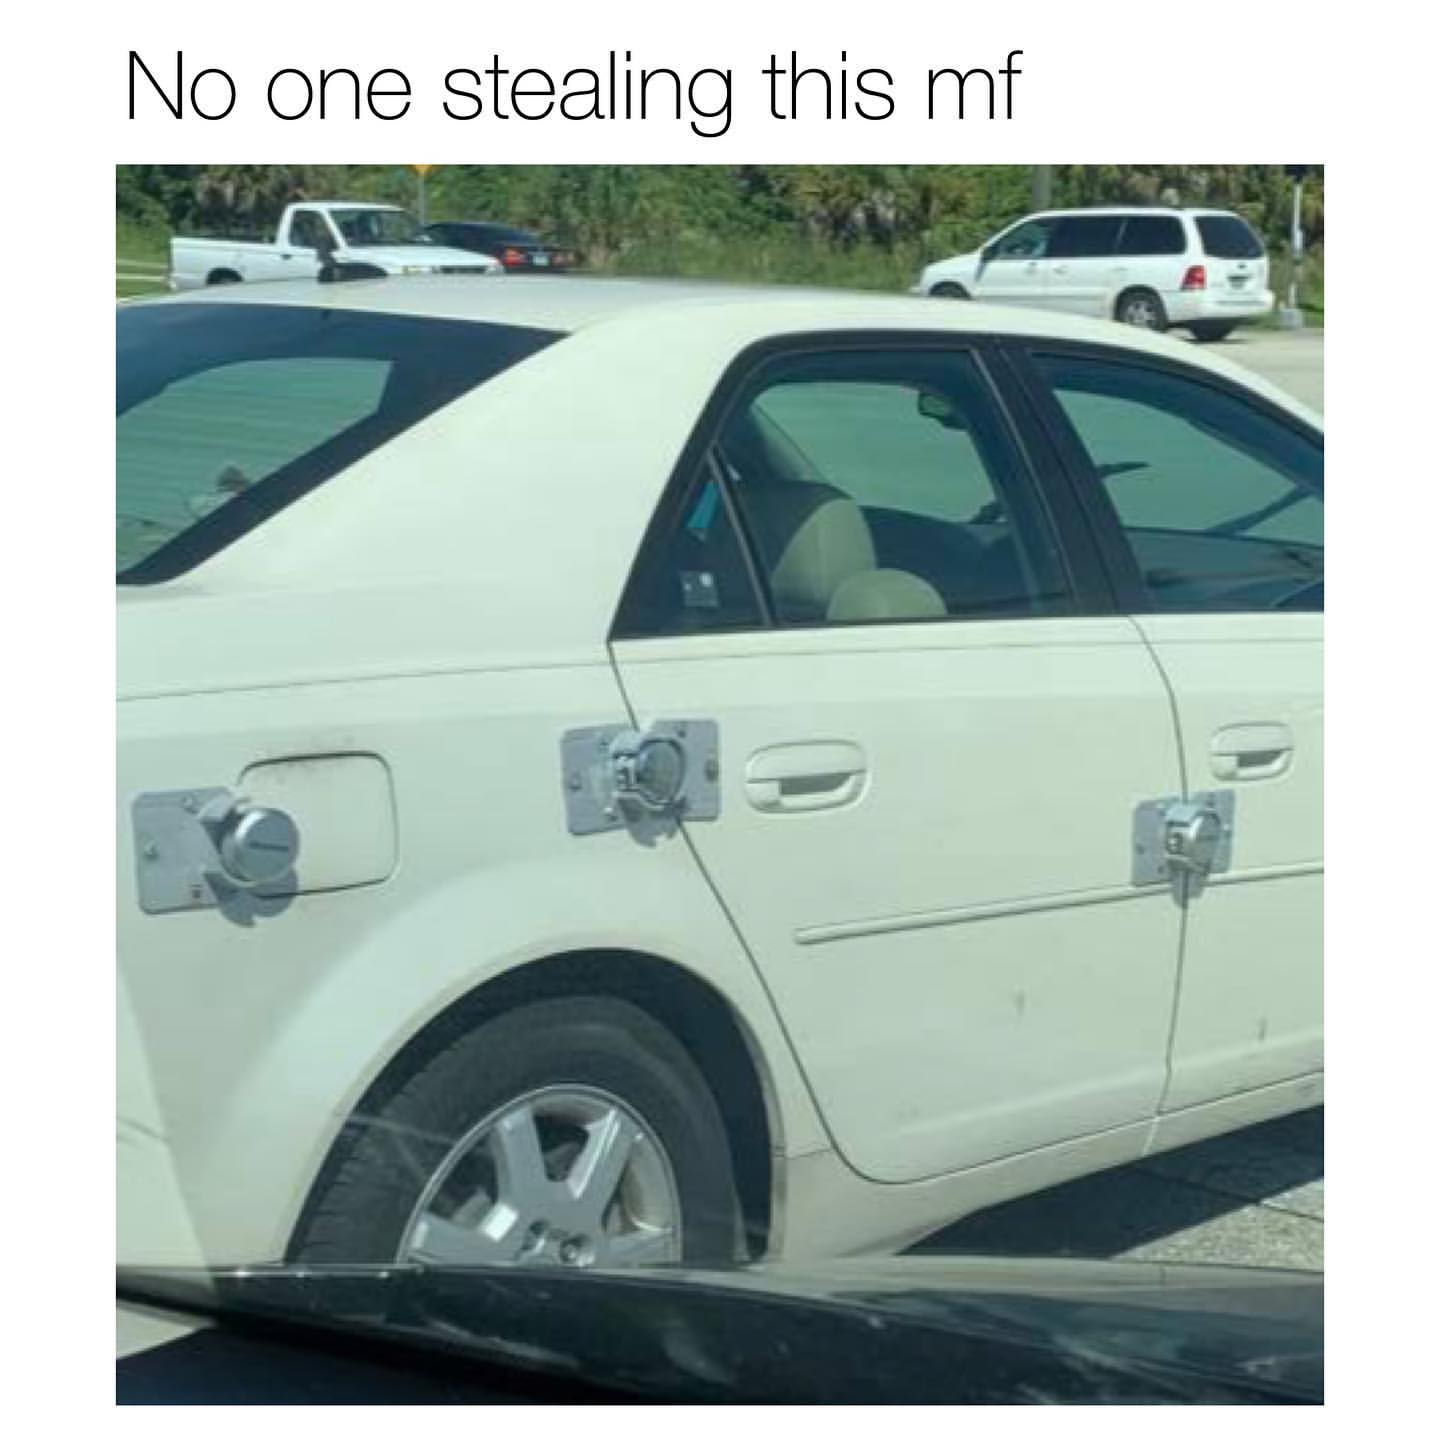 No one stealing this mf.